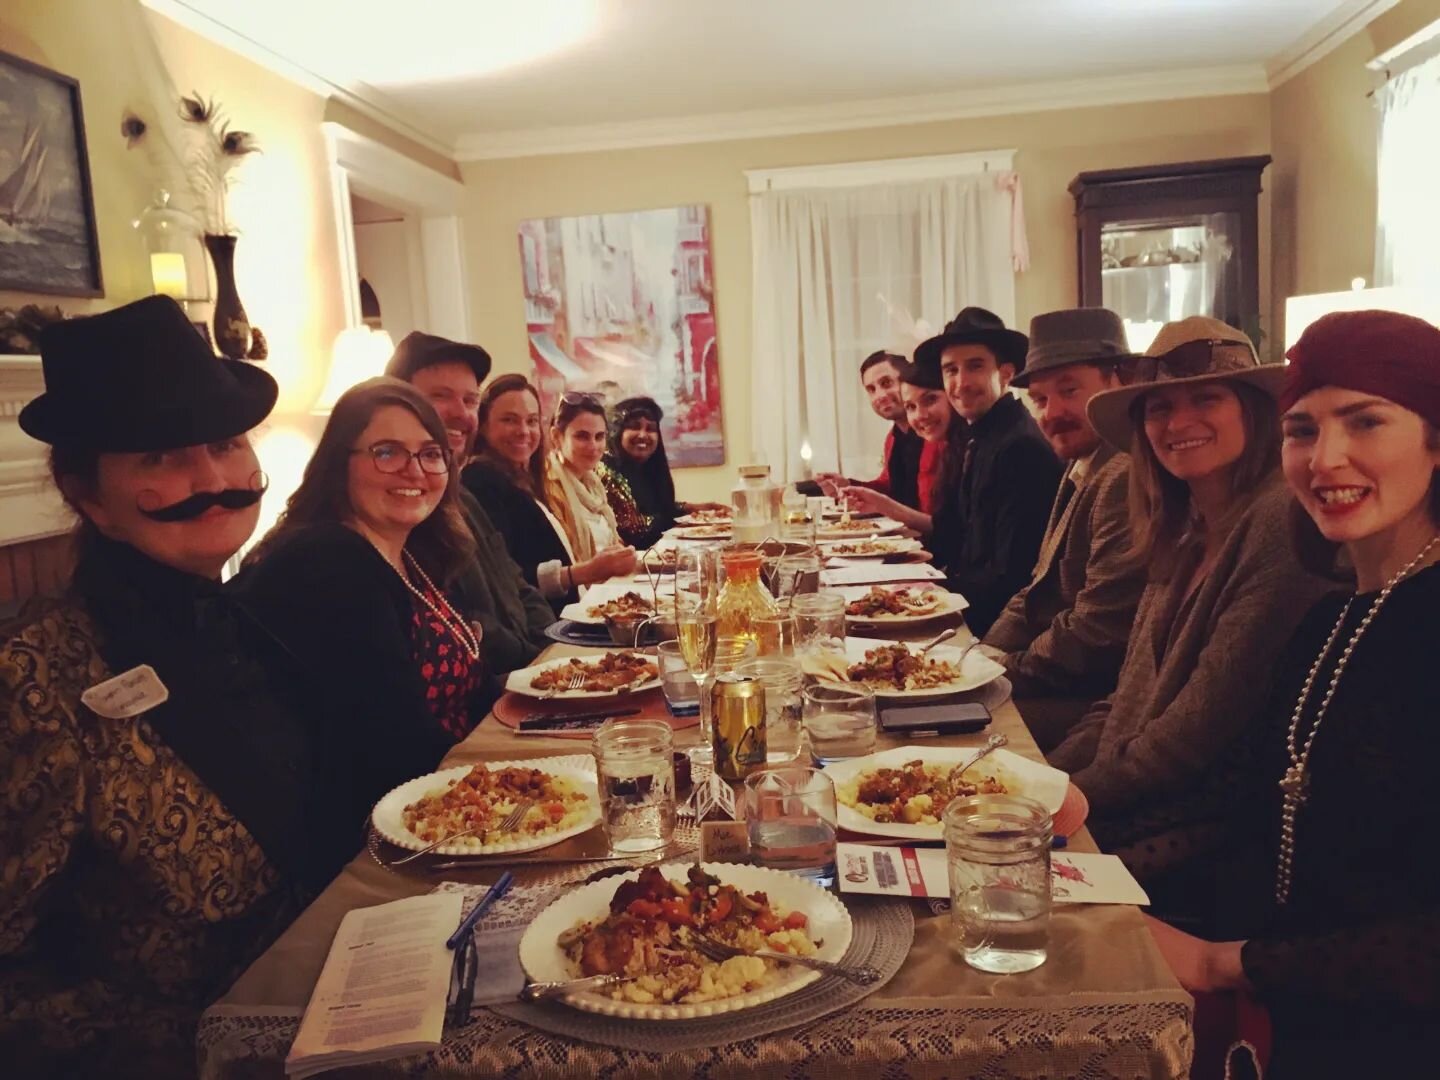 Murder Mystery Dinner and Adventure!
.
.
We got to the bottom of the Casablanca 1940&rsquo;s murder mystery&hellip; it&rsquo;s always the quiet ones! 😂
Dinner consisted of a roasted red pepper soup with a coconut ginger crema/ Moroccan chicken Tagin